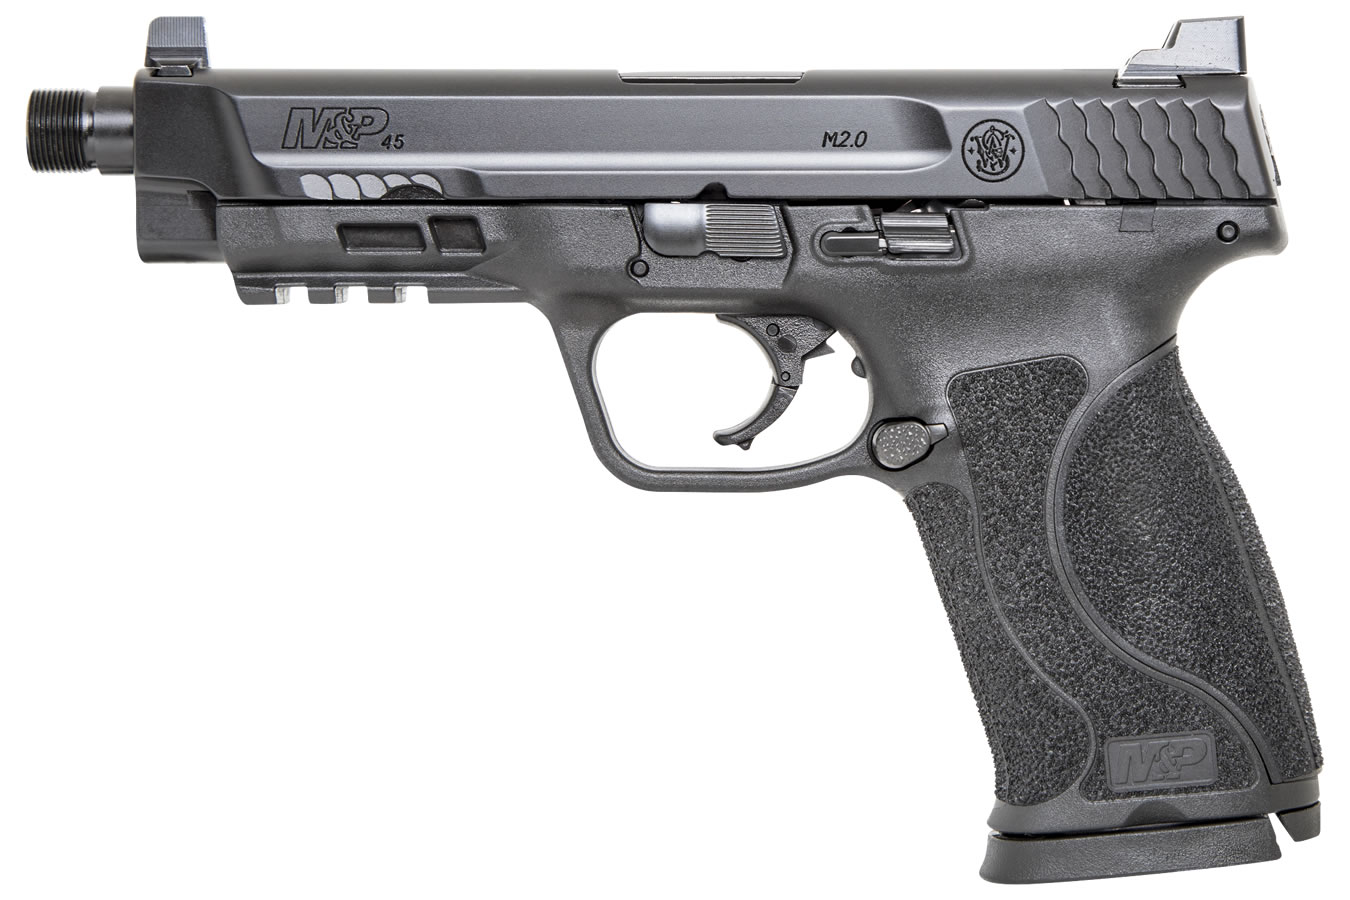 SMITH AND WESSON MP45 M2.0 45 ACP WITH THREADED BARREL